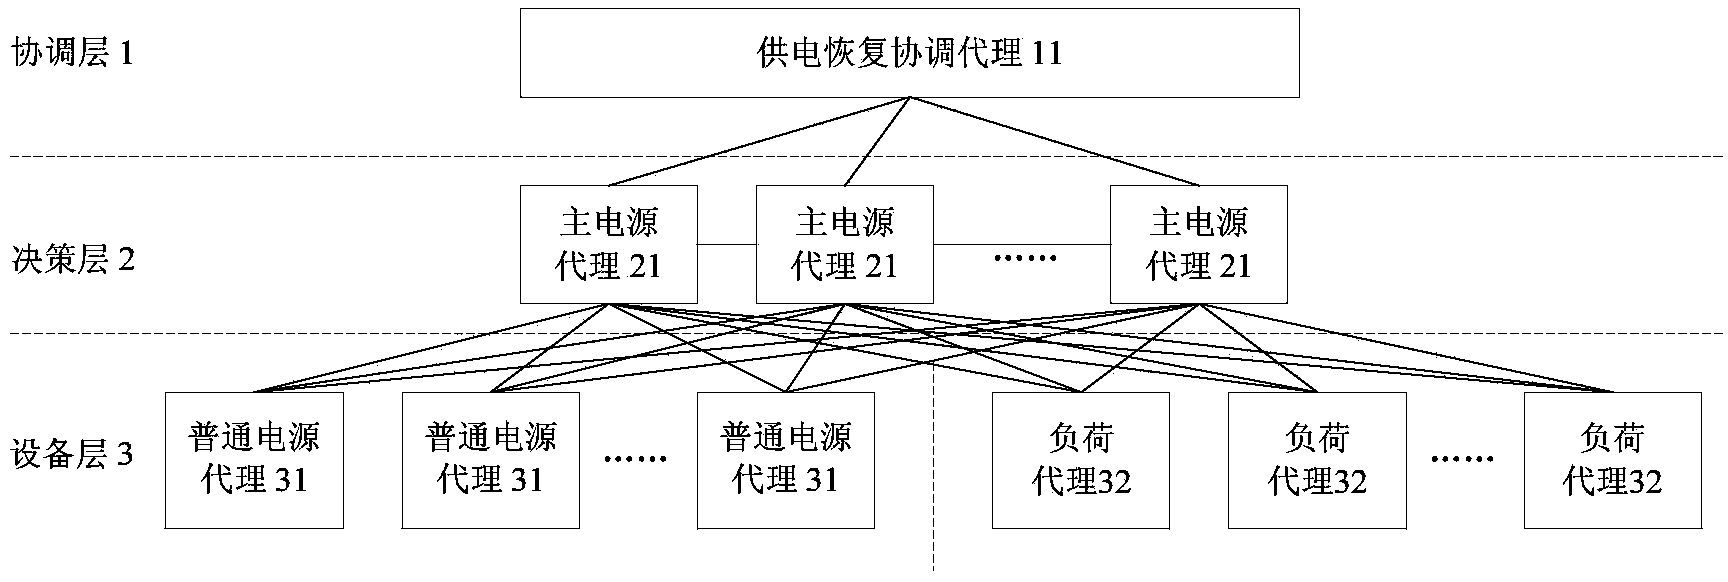 Method and system for restoring power after fault of power distribution network containing DGs (distributed generation)